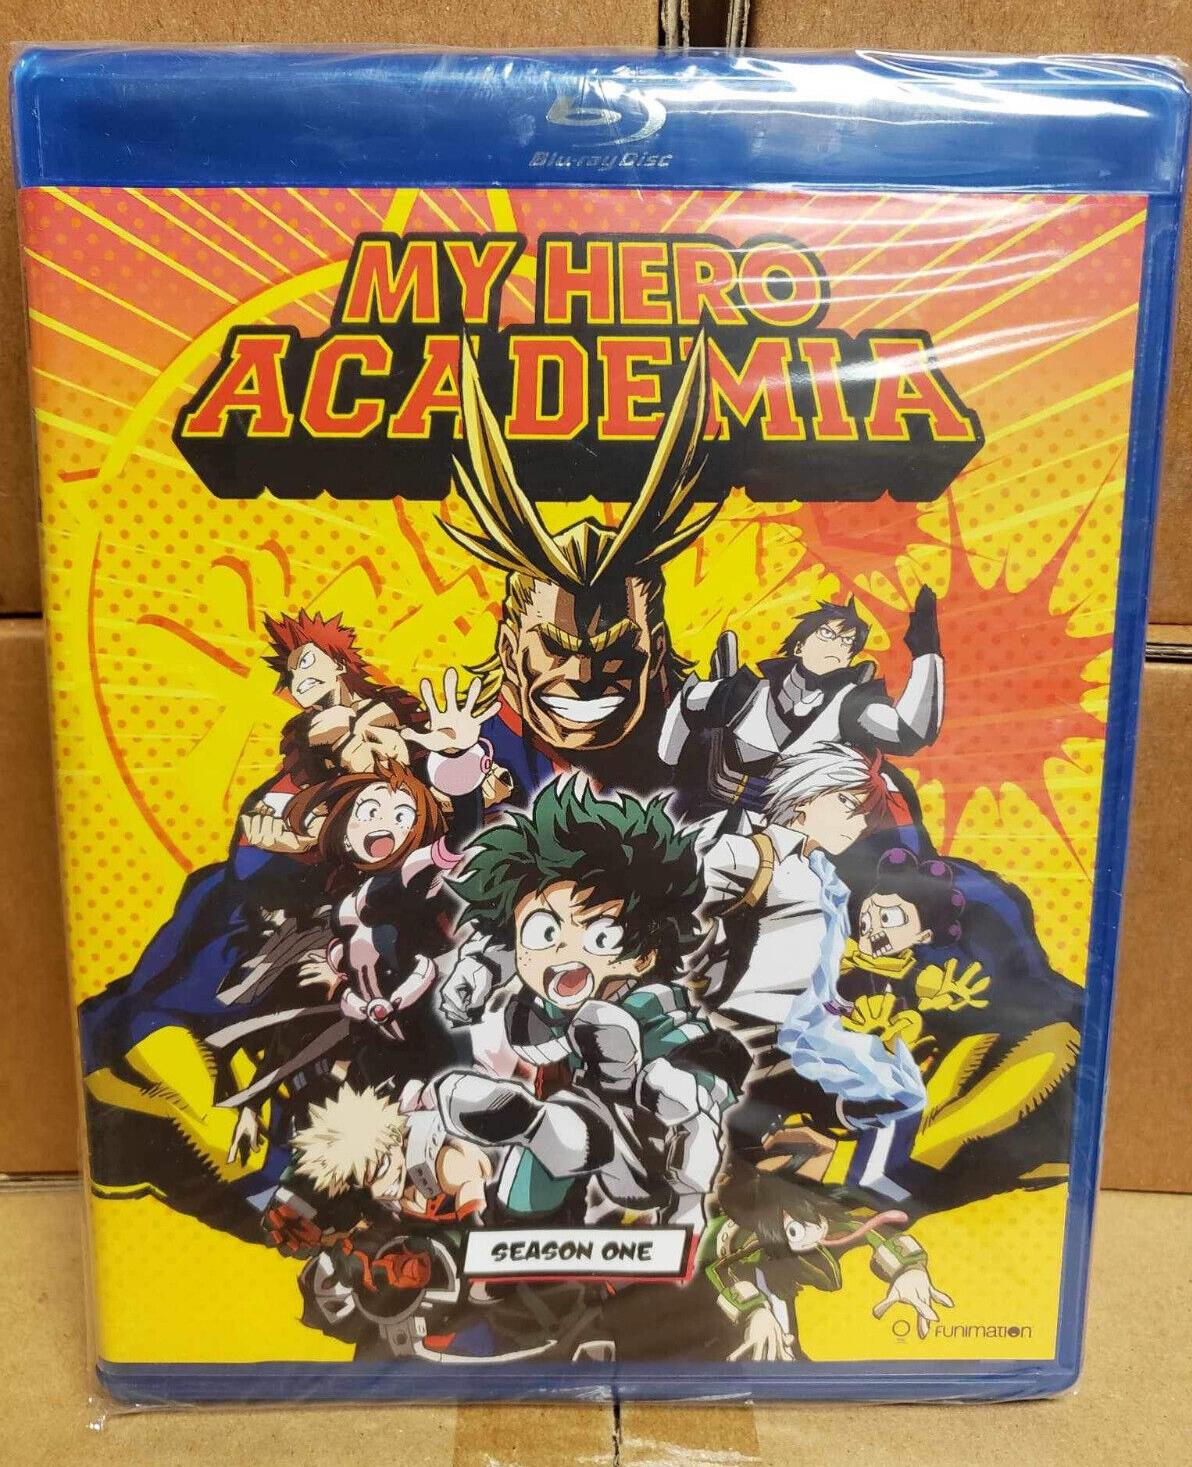 My Hero Academia First Season 1 One Limited Edition Blu-ray Only Funimation